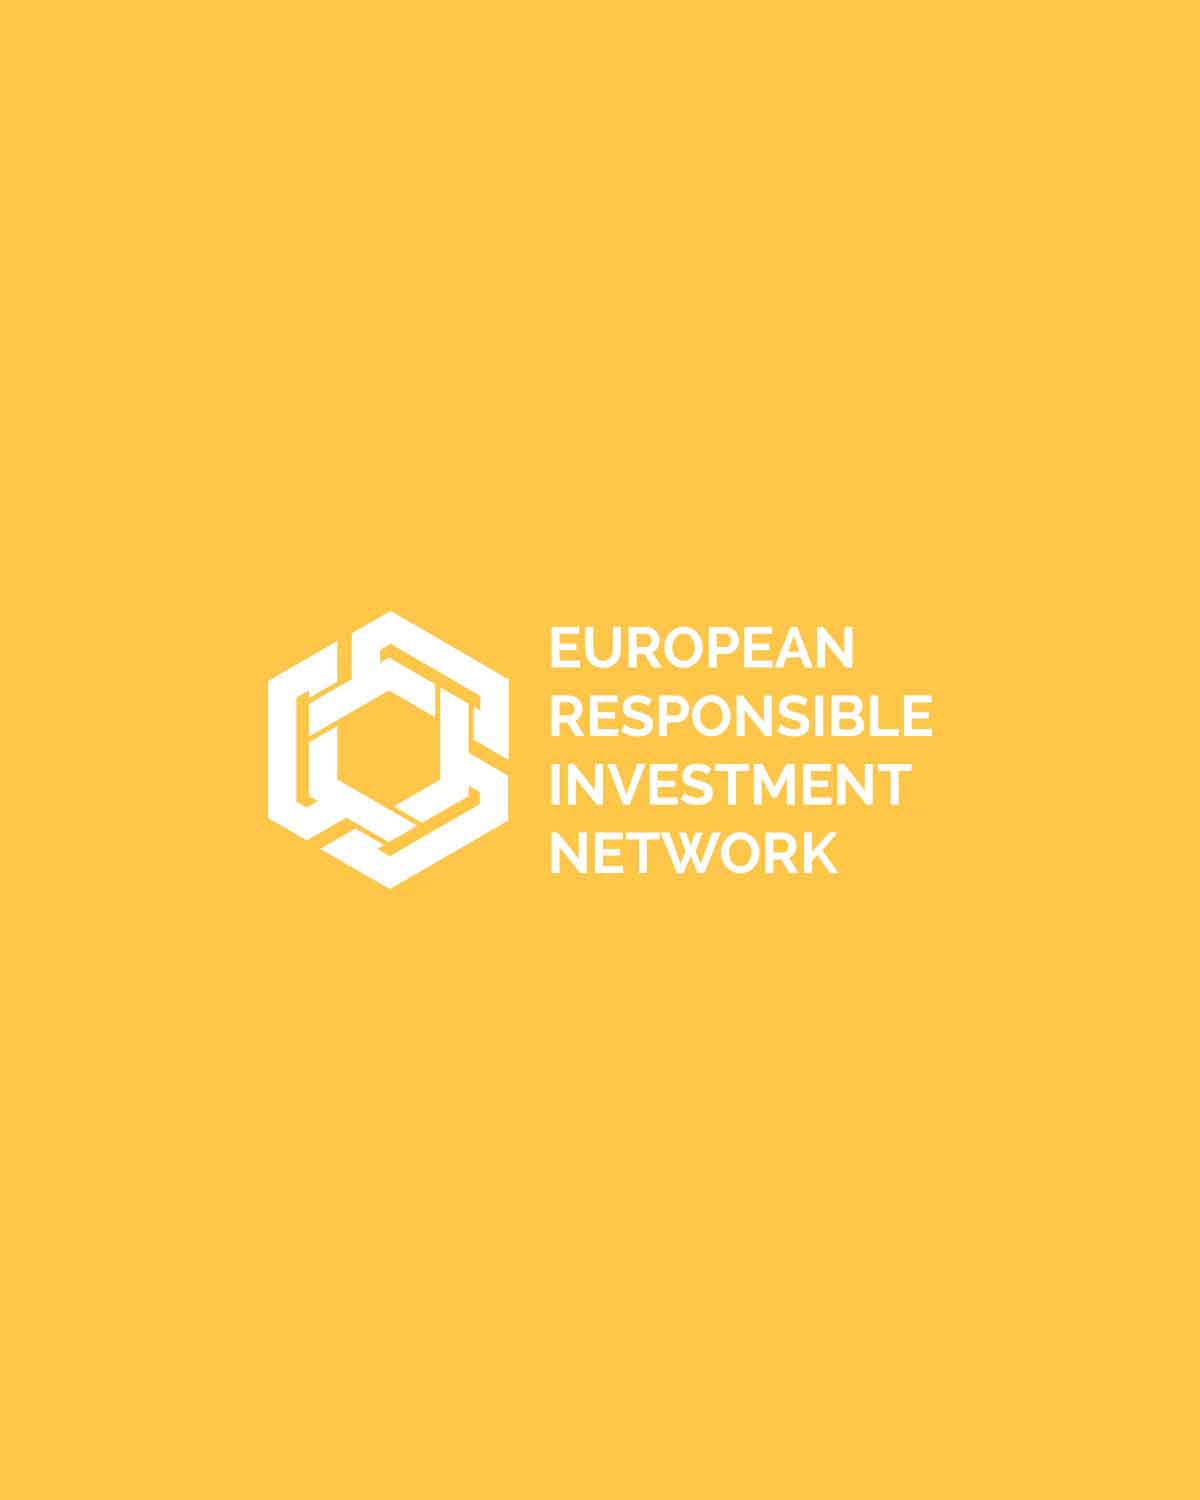 European Responsible Investment Network